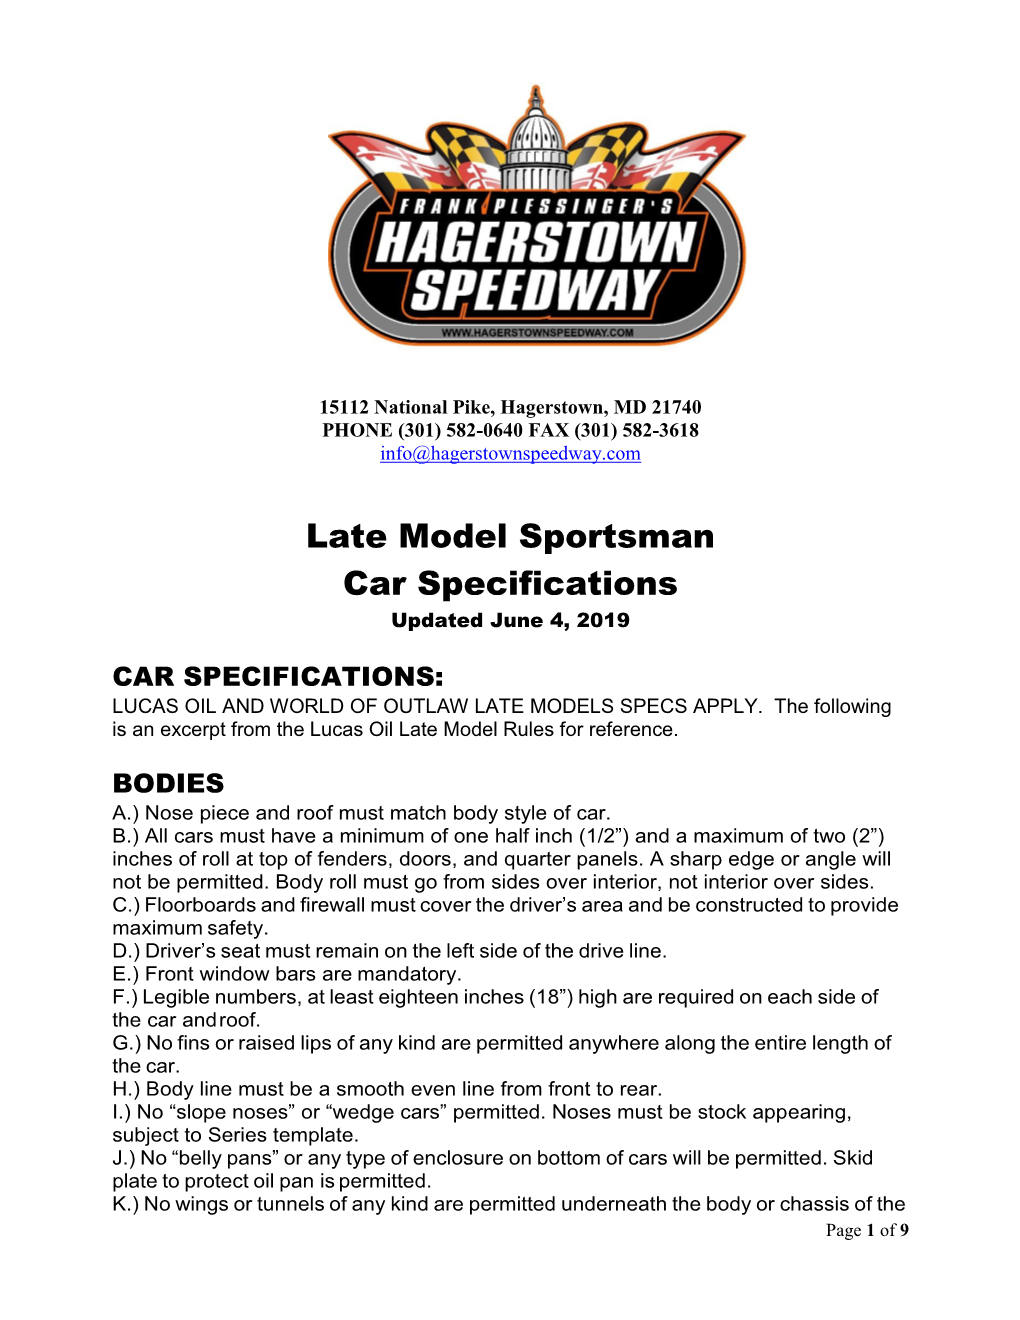 Late Model Sportsman Car Specifications Updated June 4, 2019